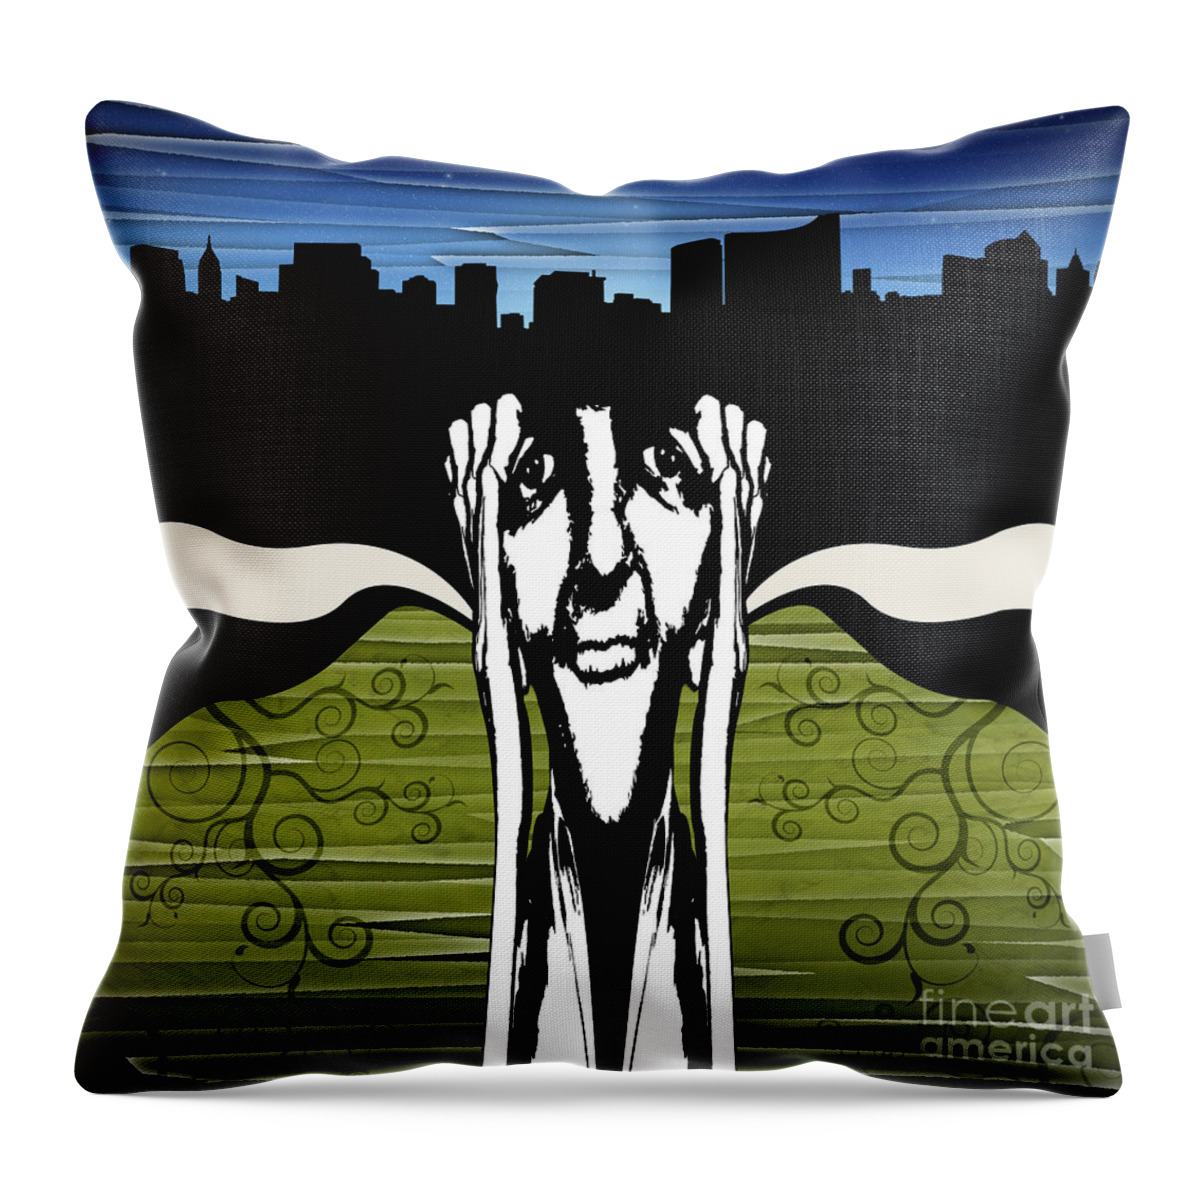 Face Throw Pillow featuring the digital art City At Night by Phil Perkins